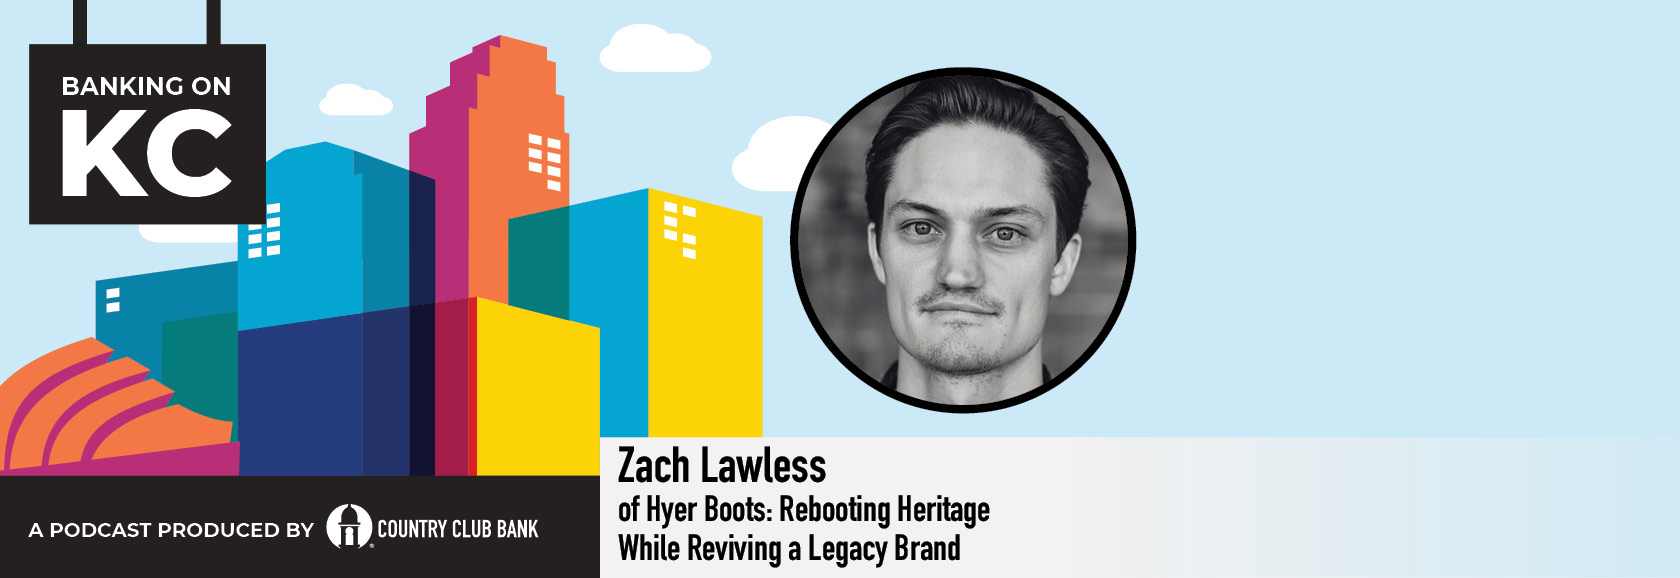 Banking on KC – Zach Lawless banner image